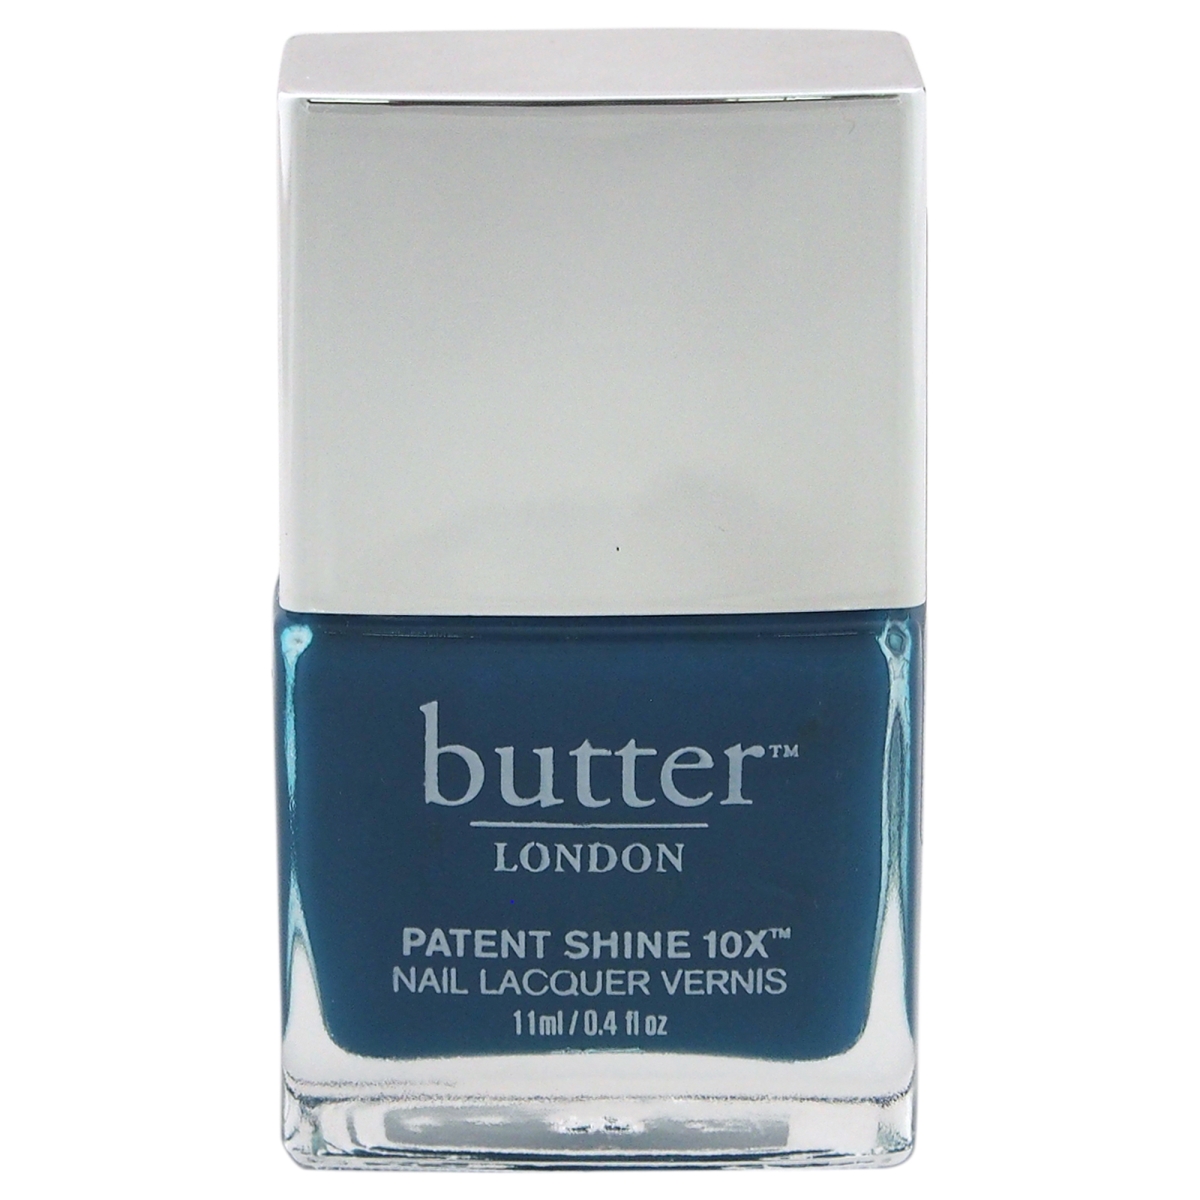 W-c-9724 0.4 Oz Patent Shine 10x Nail Lacquer - Chat Up For Women